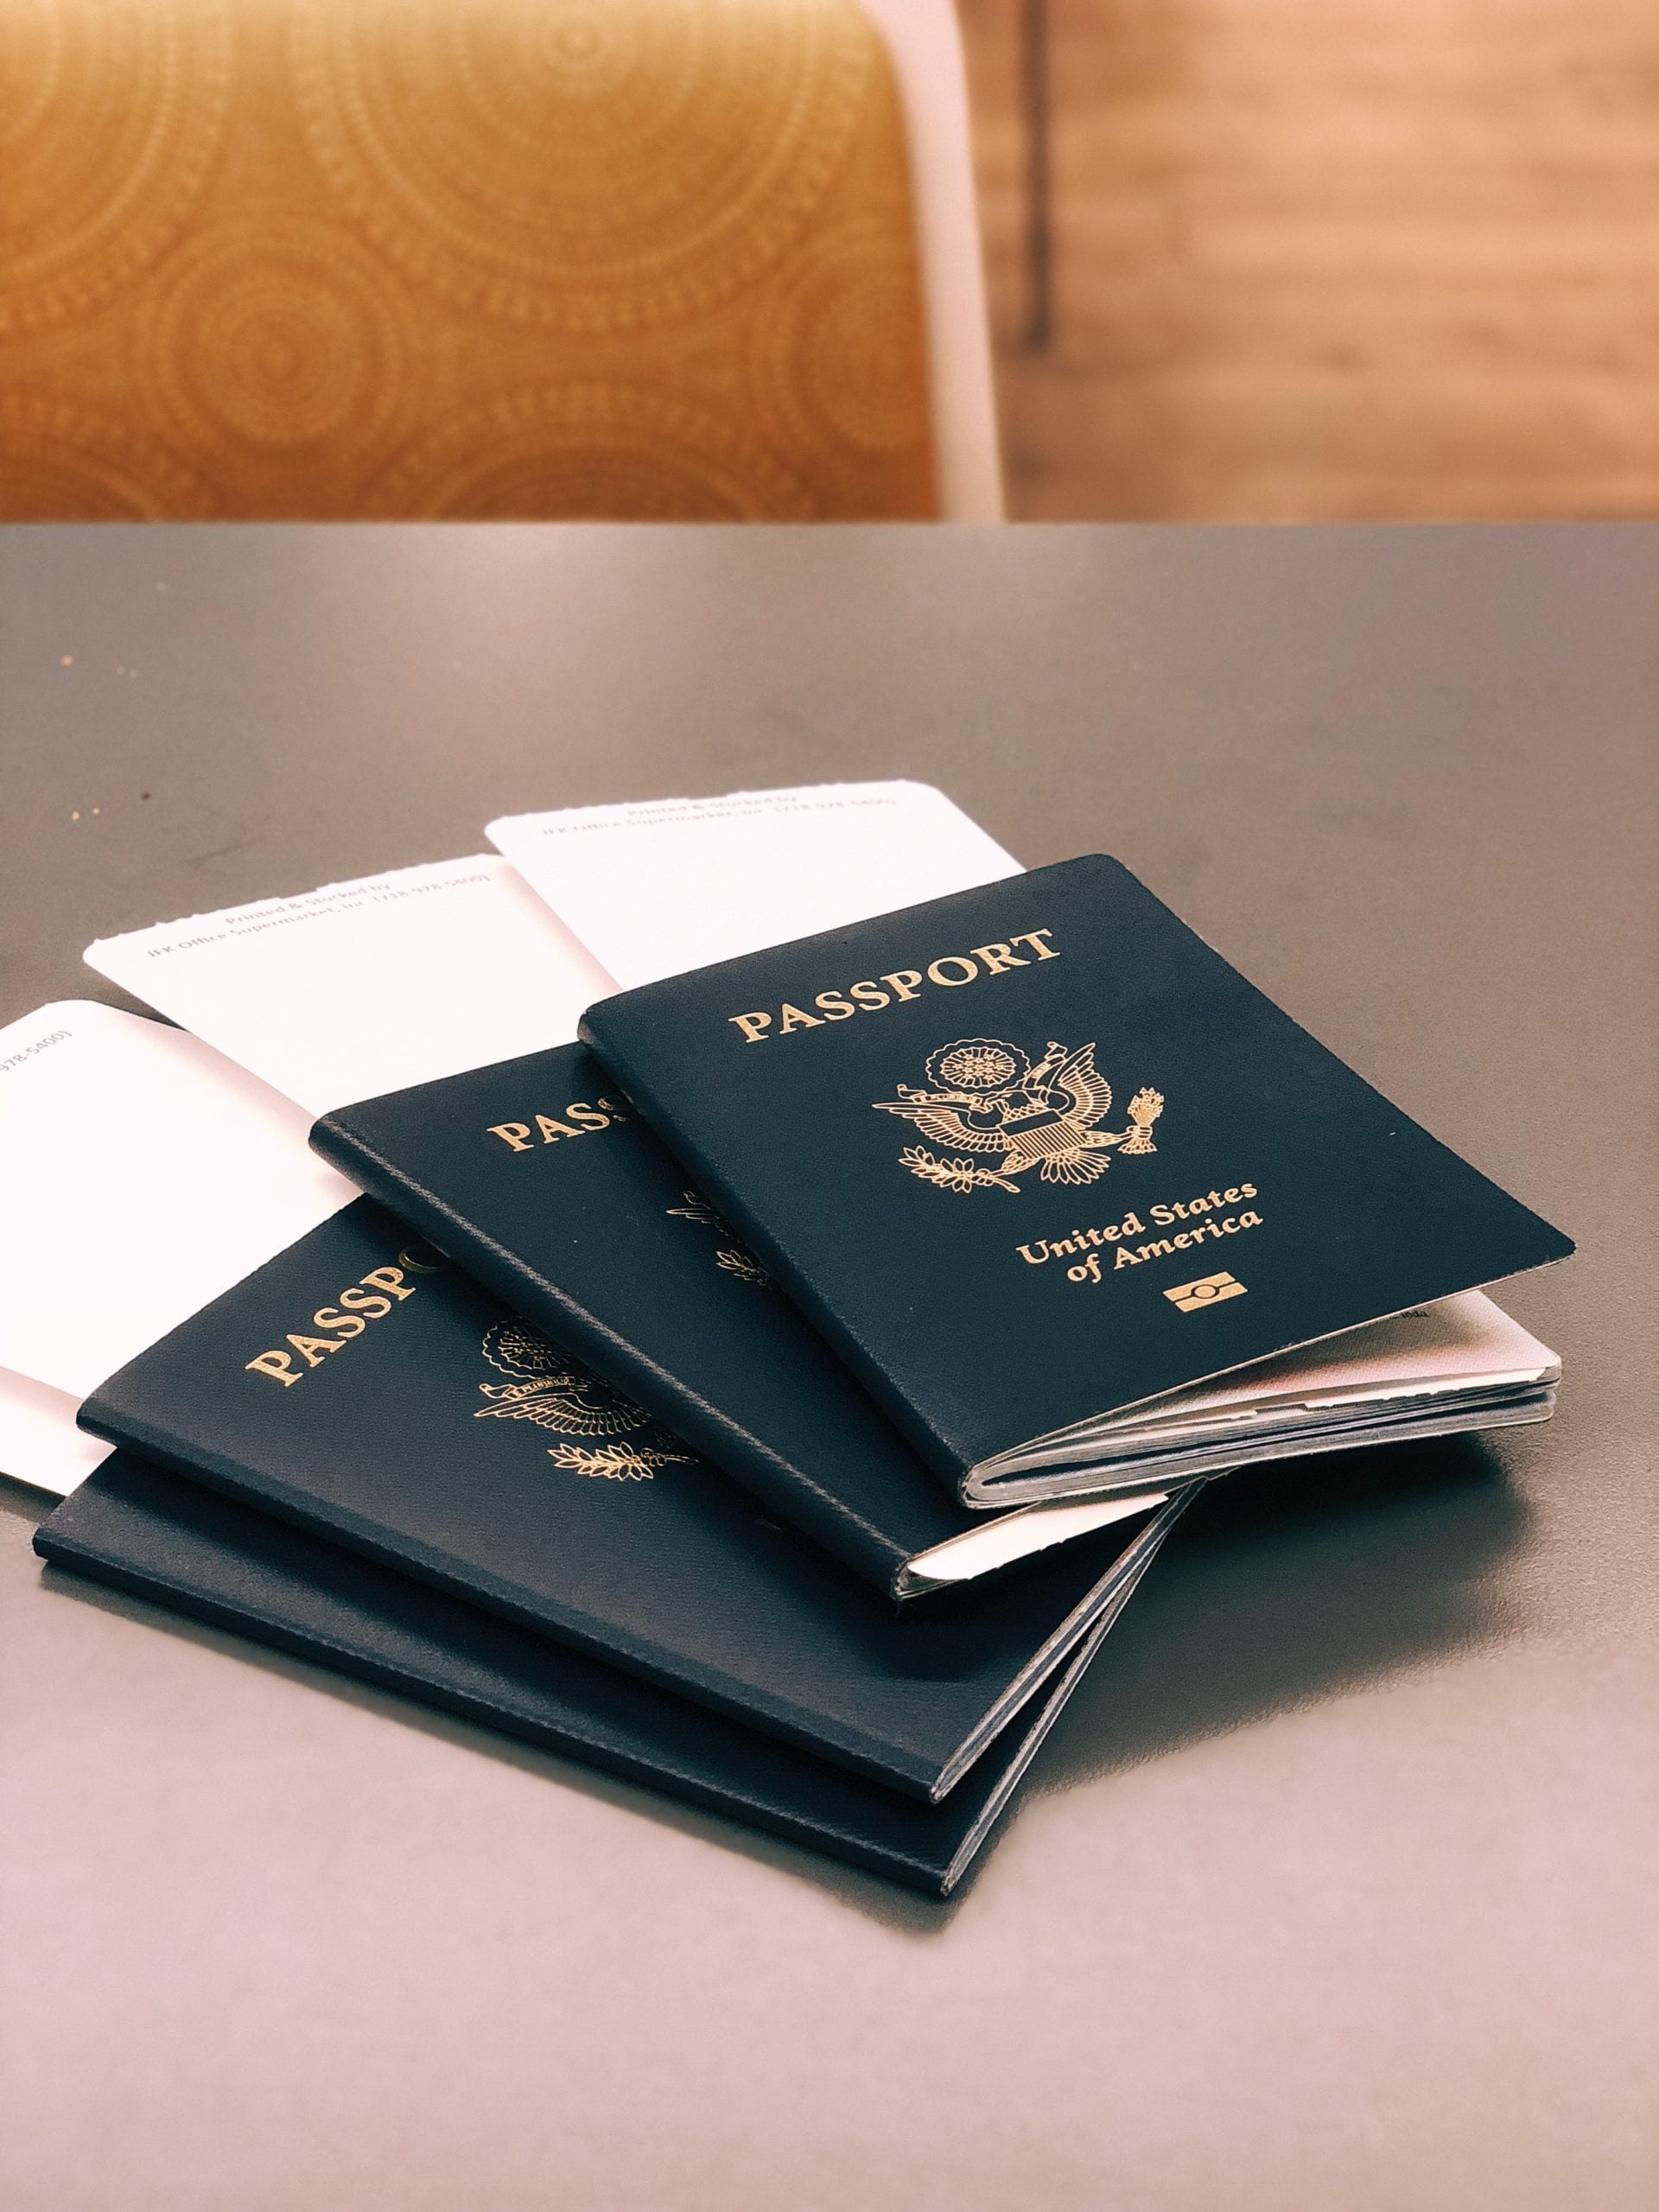 passports on a table